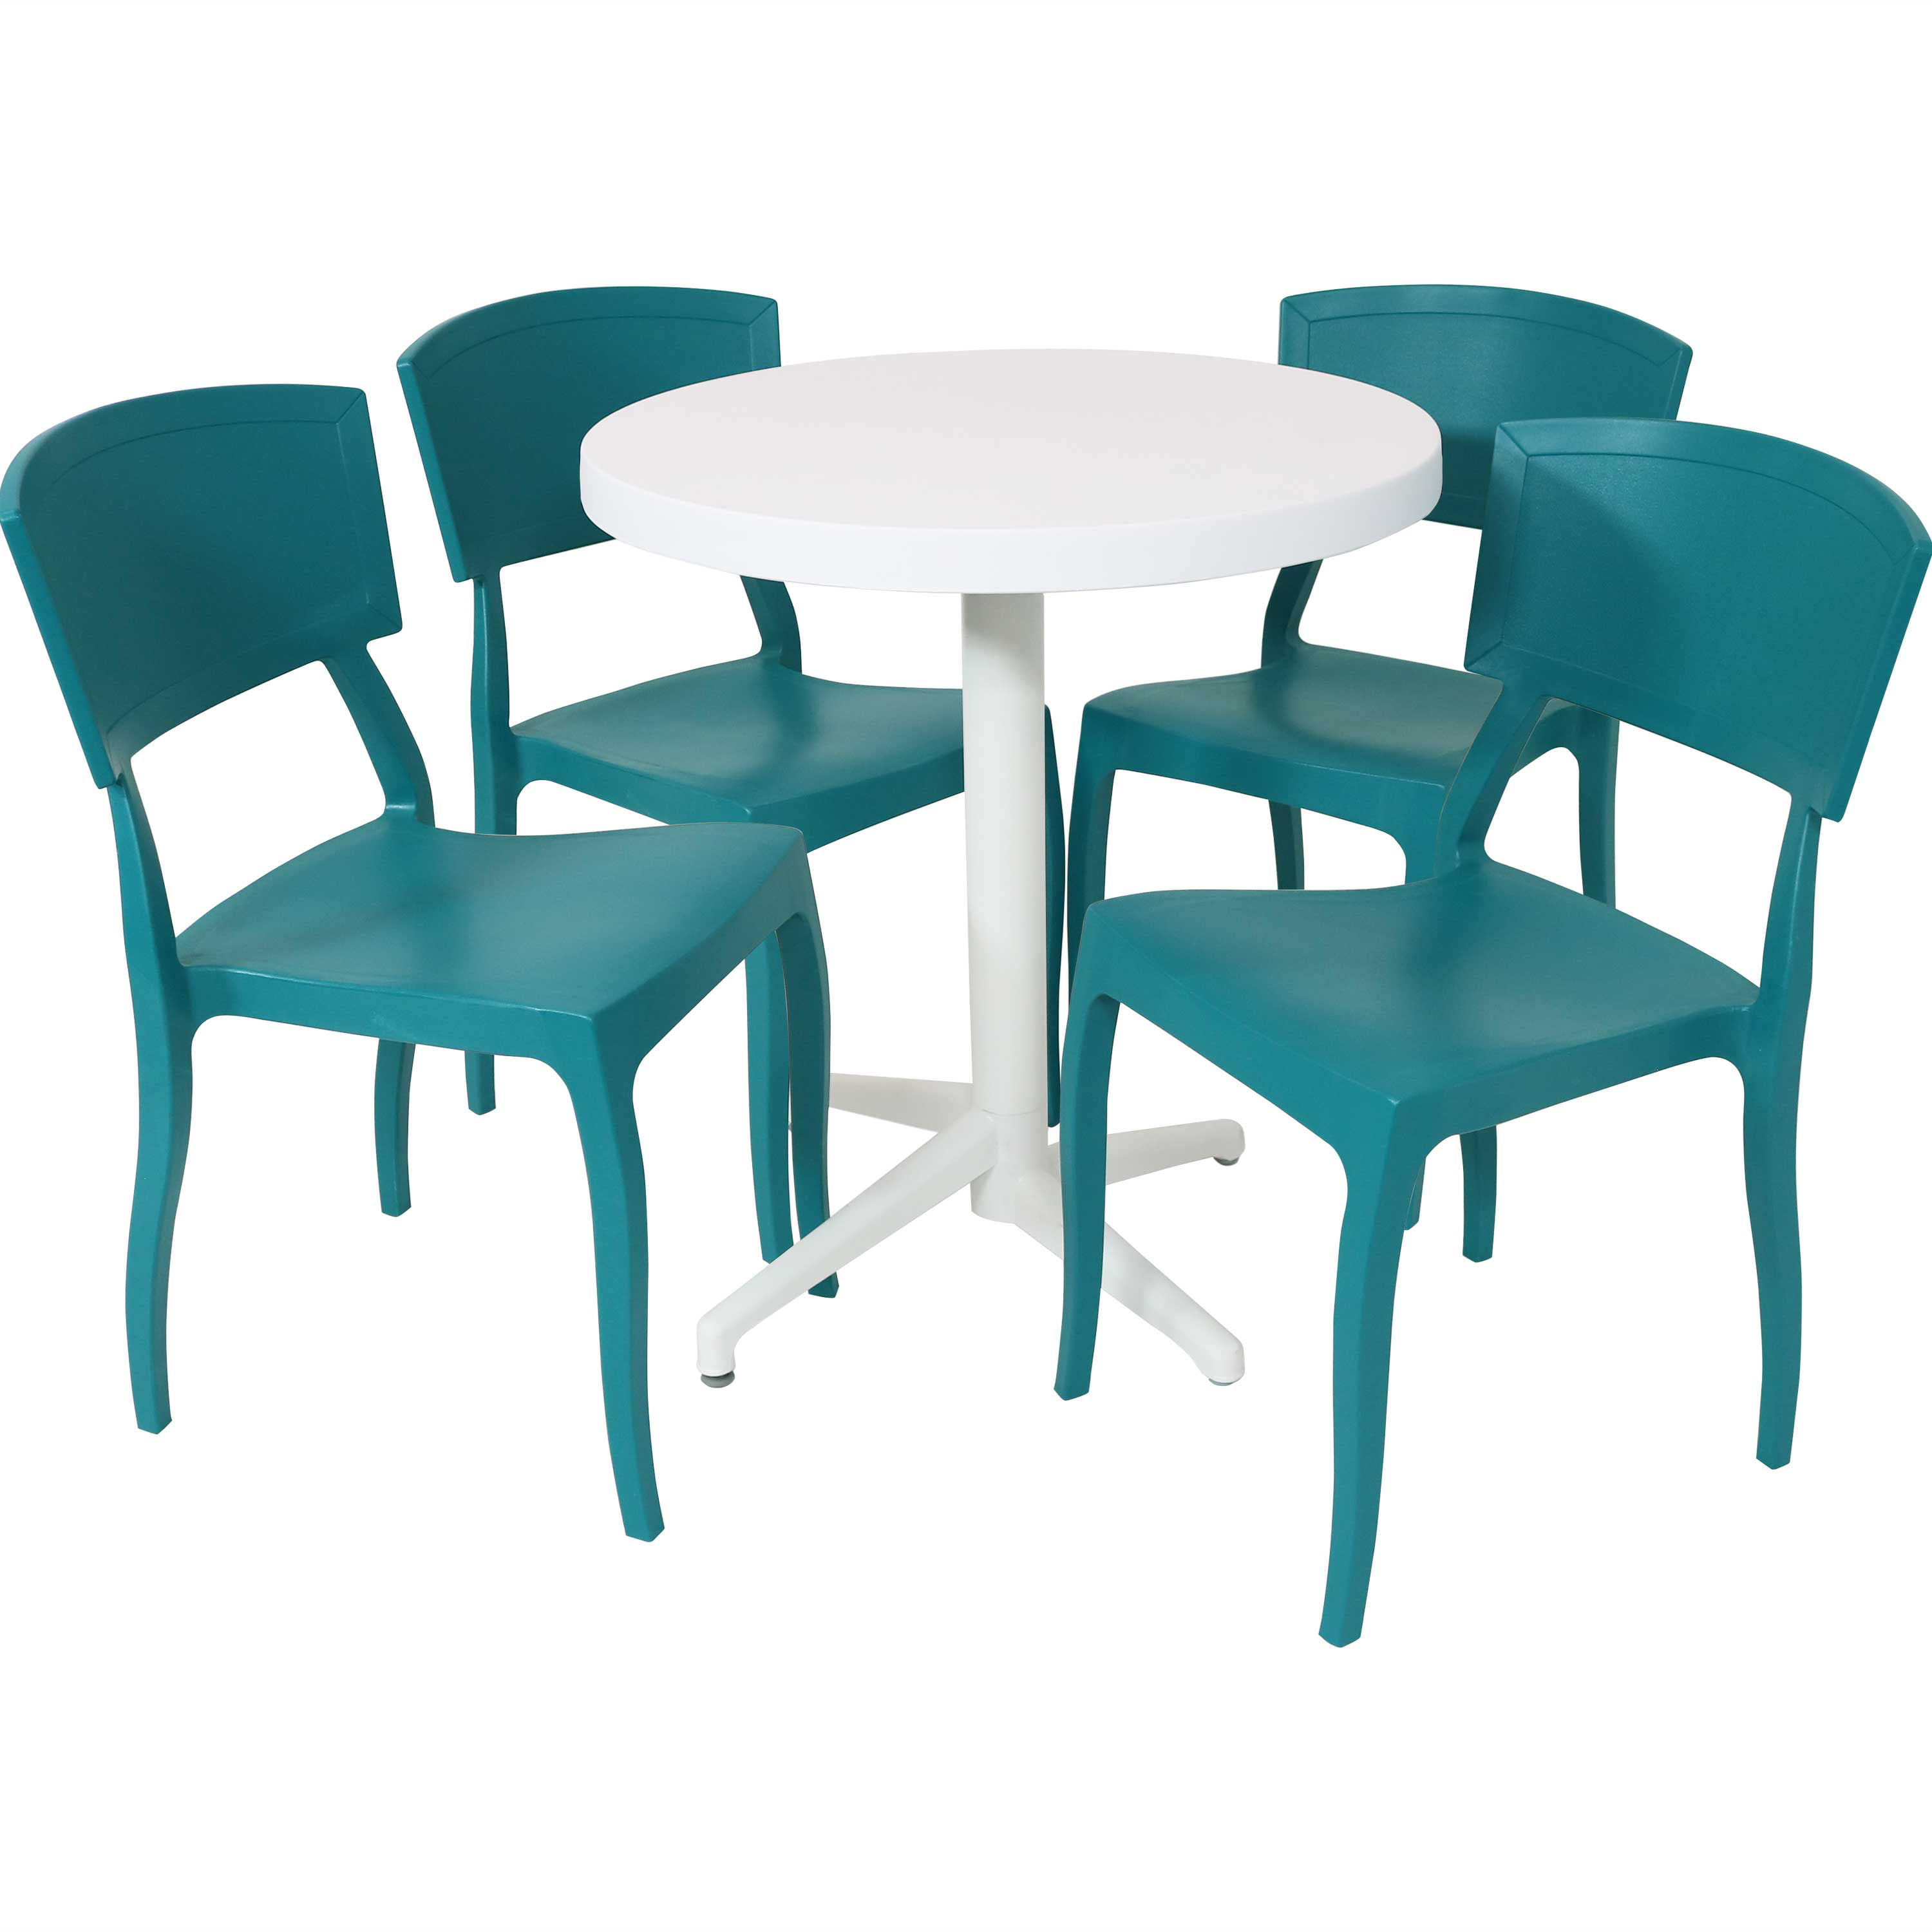 Sunnydaze All-Weather Elmott Outdoor 5-Piece Patio Furniture Dining Set Commercial Grade Indoor/Outdoor Use Includes Round Table with Folding Top and 4 Chairs Light Blue Chairs/White Table 